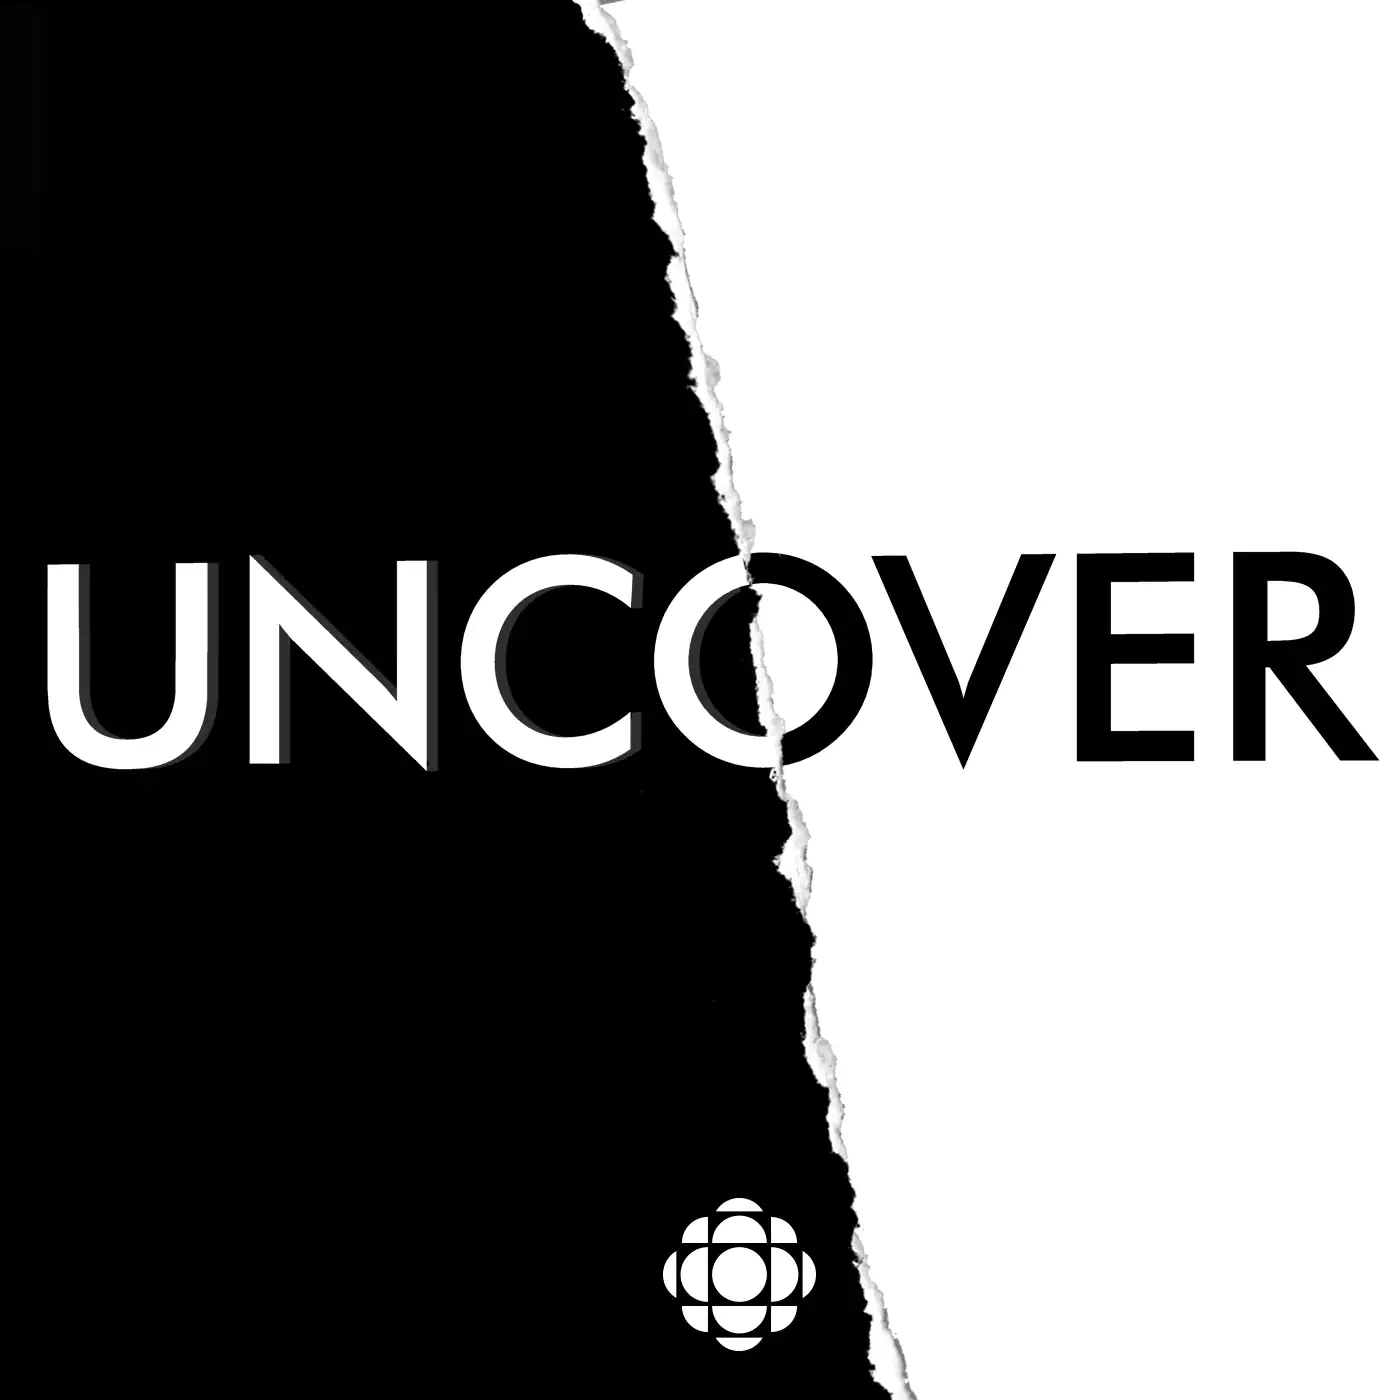 Tile for CBC podcast, Uncover.